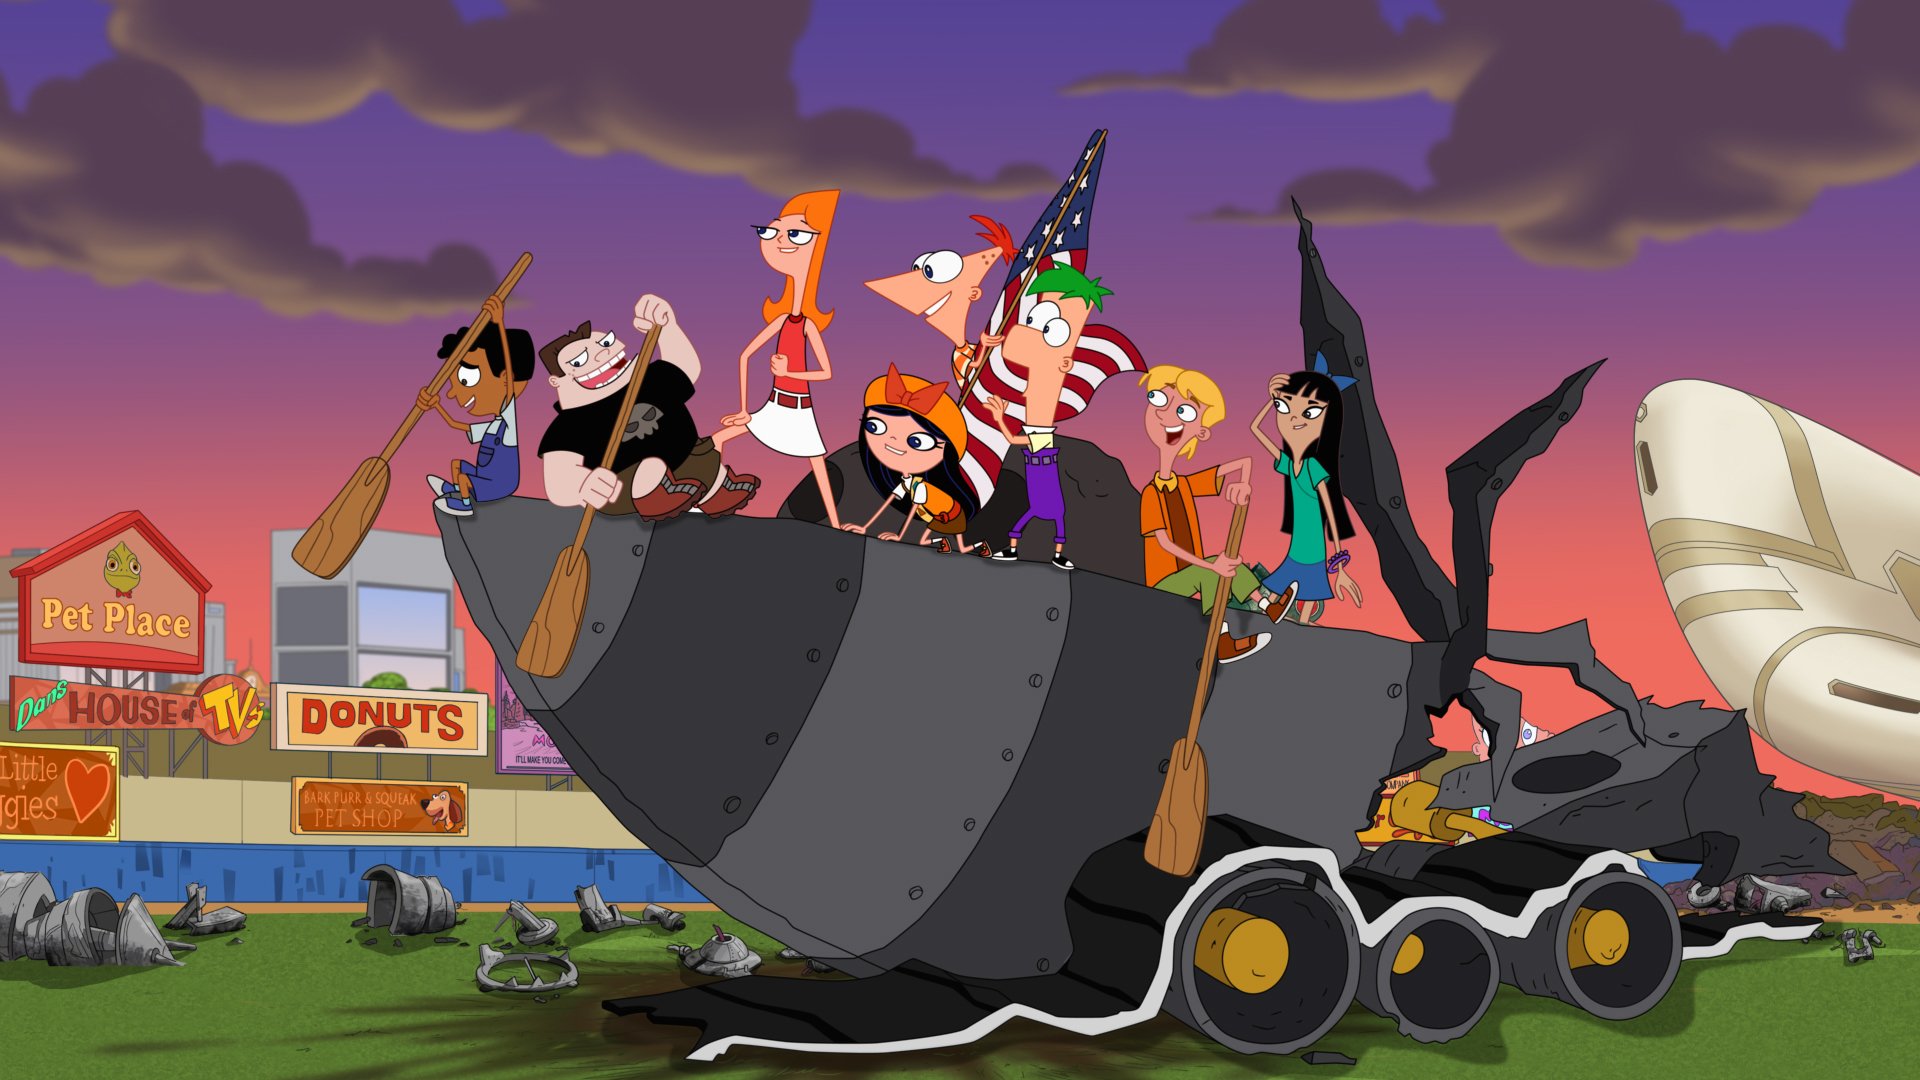 Candace and the Danville gang in 'Phineas and Ferb The Movie: Candace Against the Universe.'